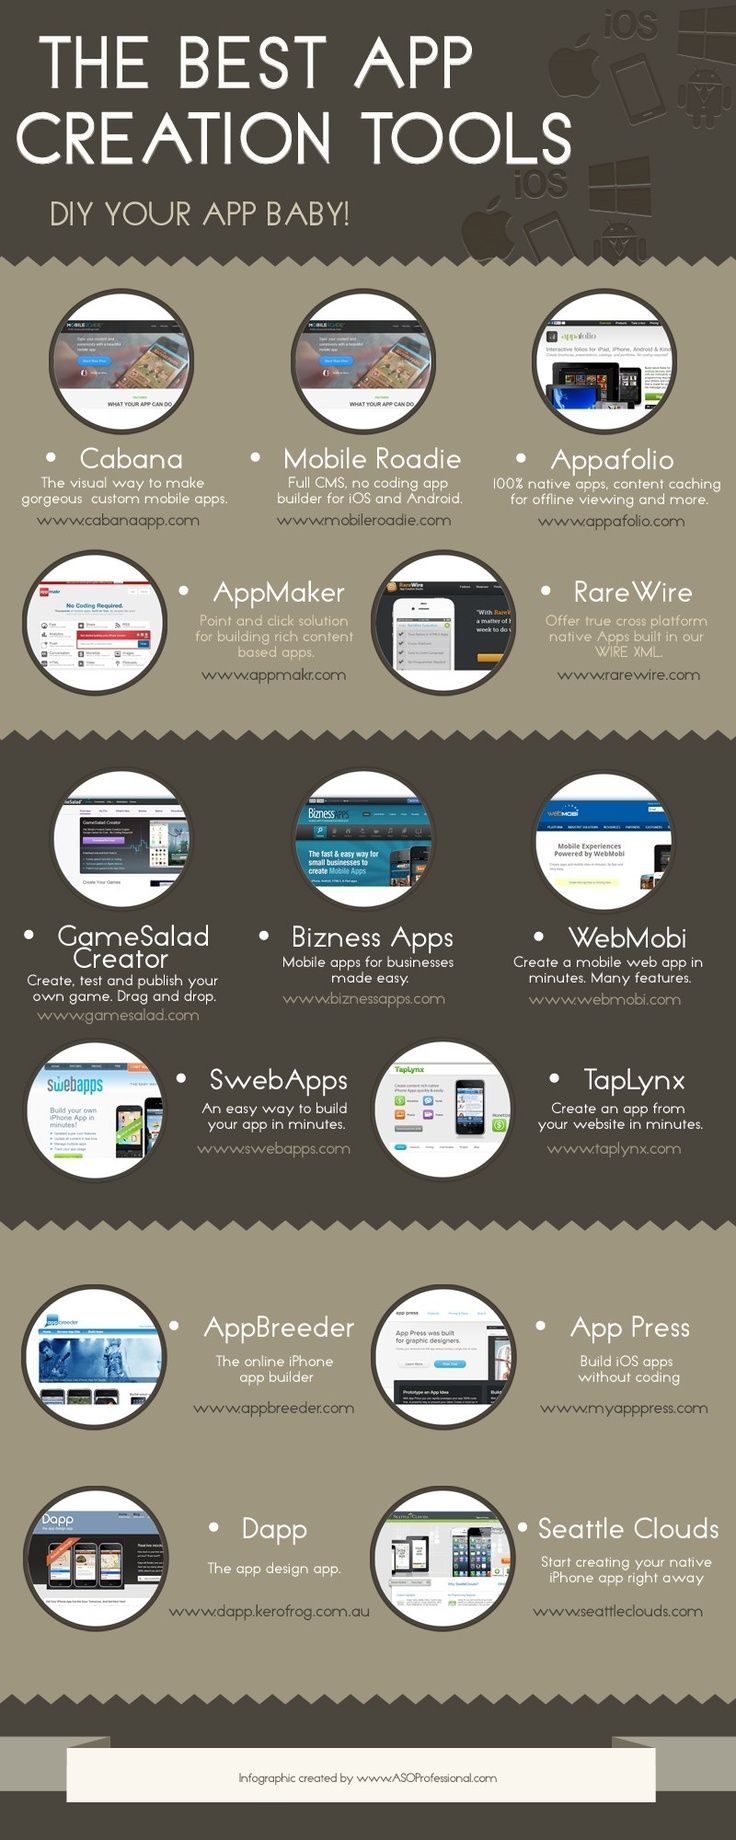 Advertising-Infographics-Developing-apps-won’t-make-your-business-a-leader-in-mobile-marketing-these-da Advertising Infographics : Developing apps won’t make your business a leader in mobile marketing these da...